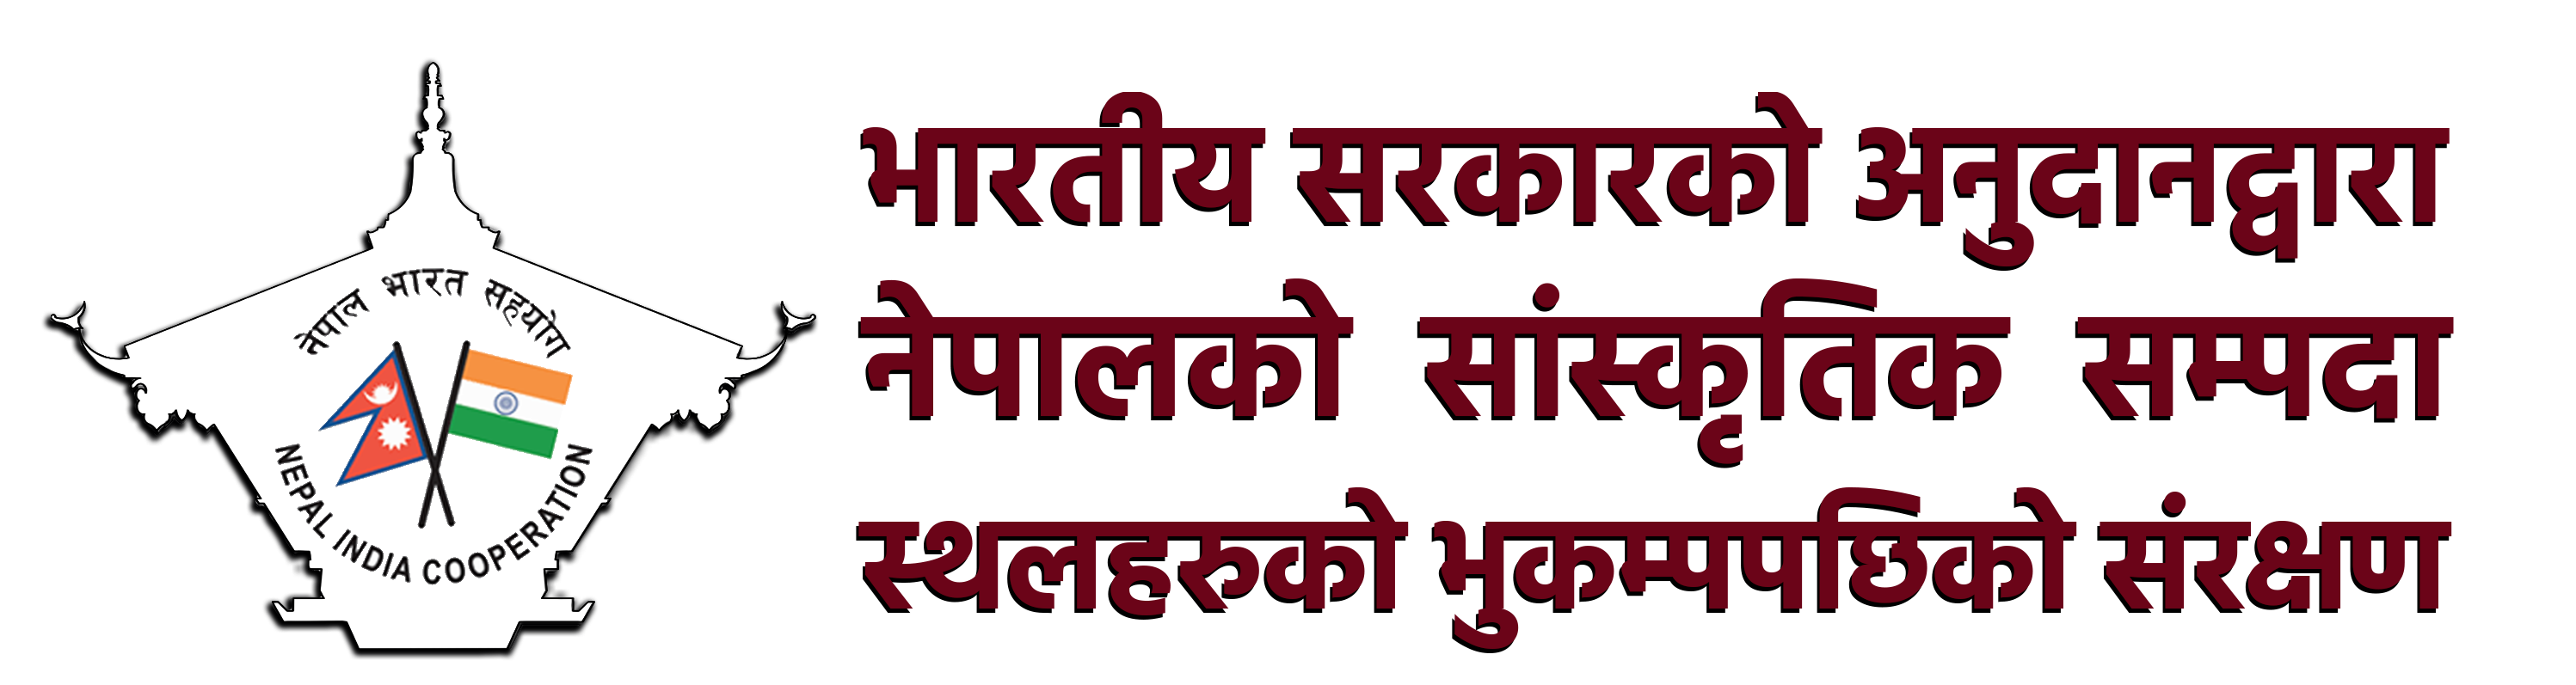 Nepal Cultural Projects